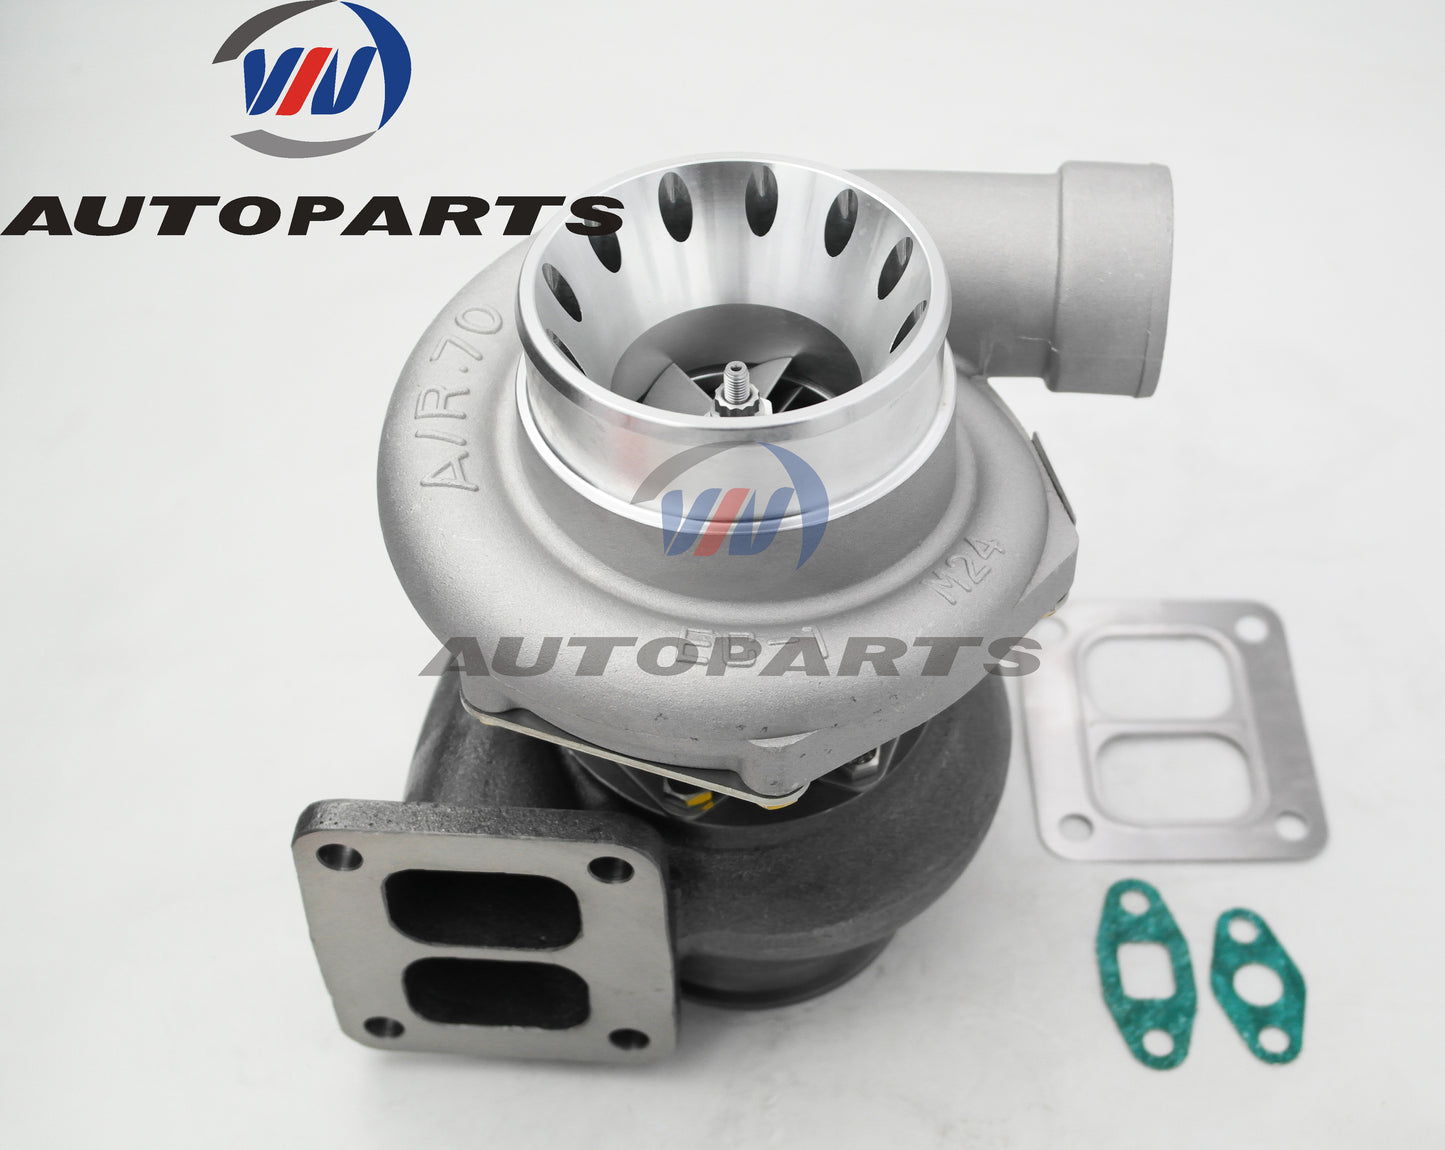 T6266 T04Z Ported S compressor cover .70 intake,A/R .84 Exhaust T4 Twin srcoll oil cooled performance turbo 600-700horse power